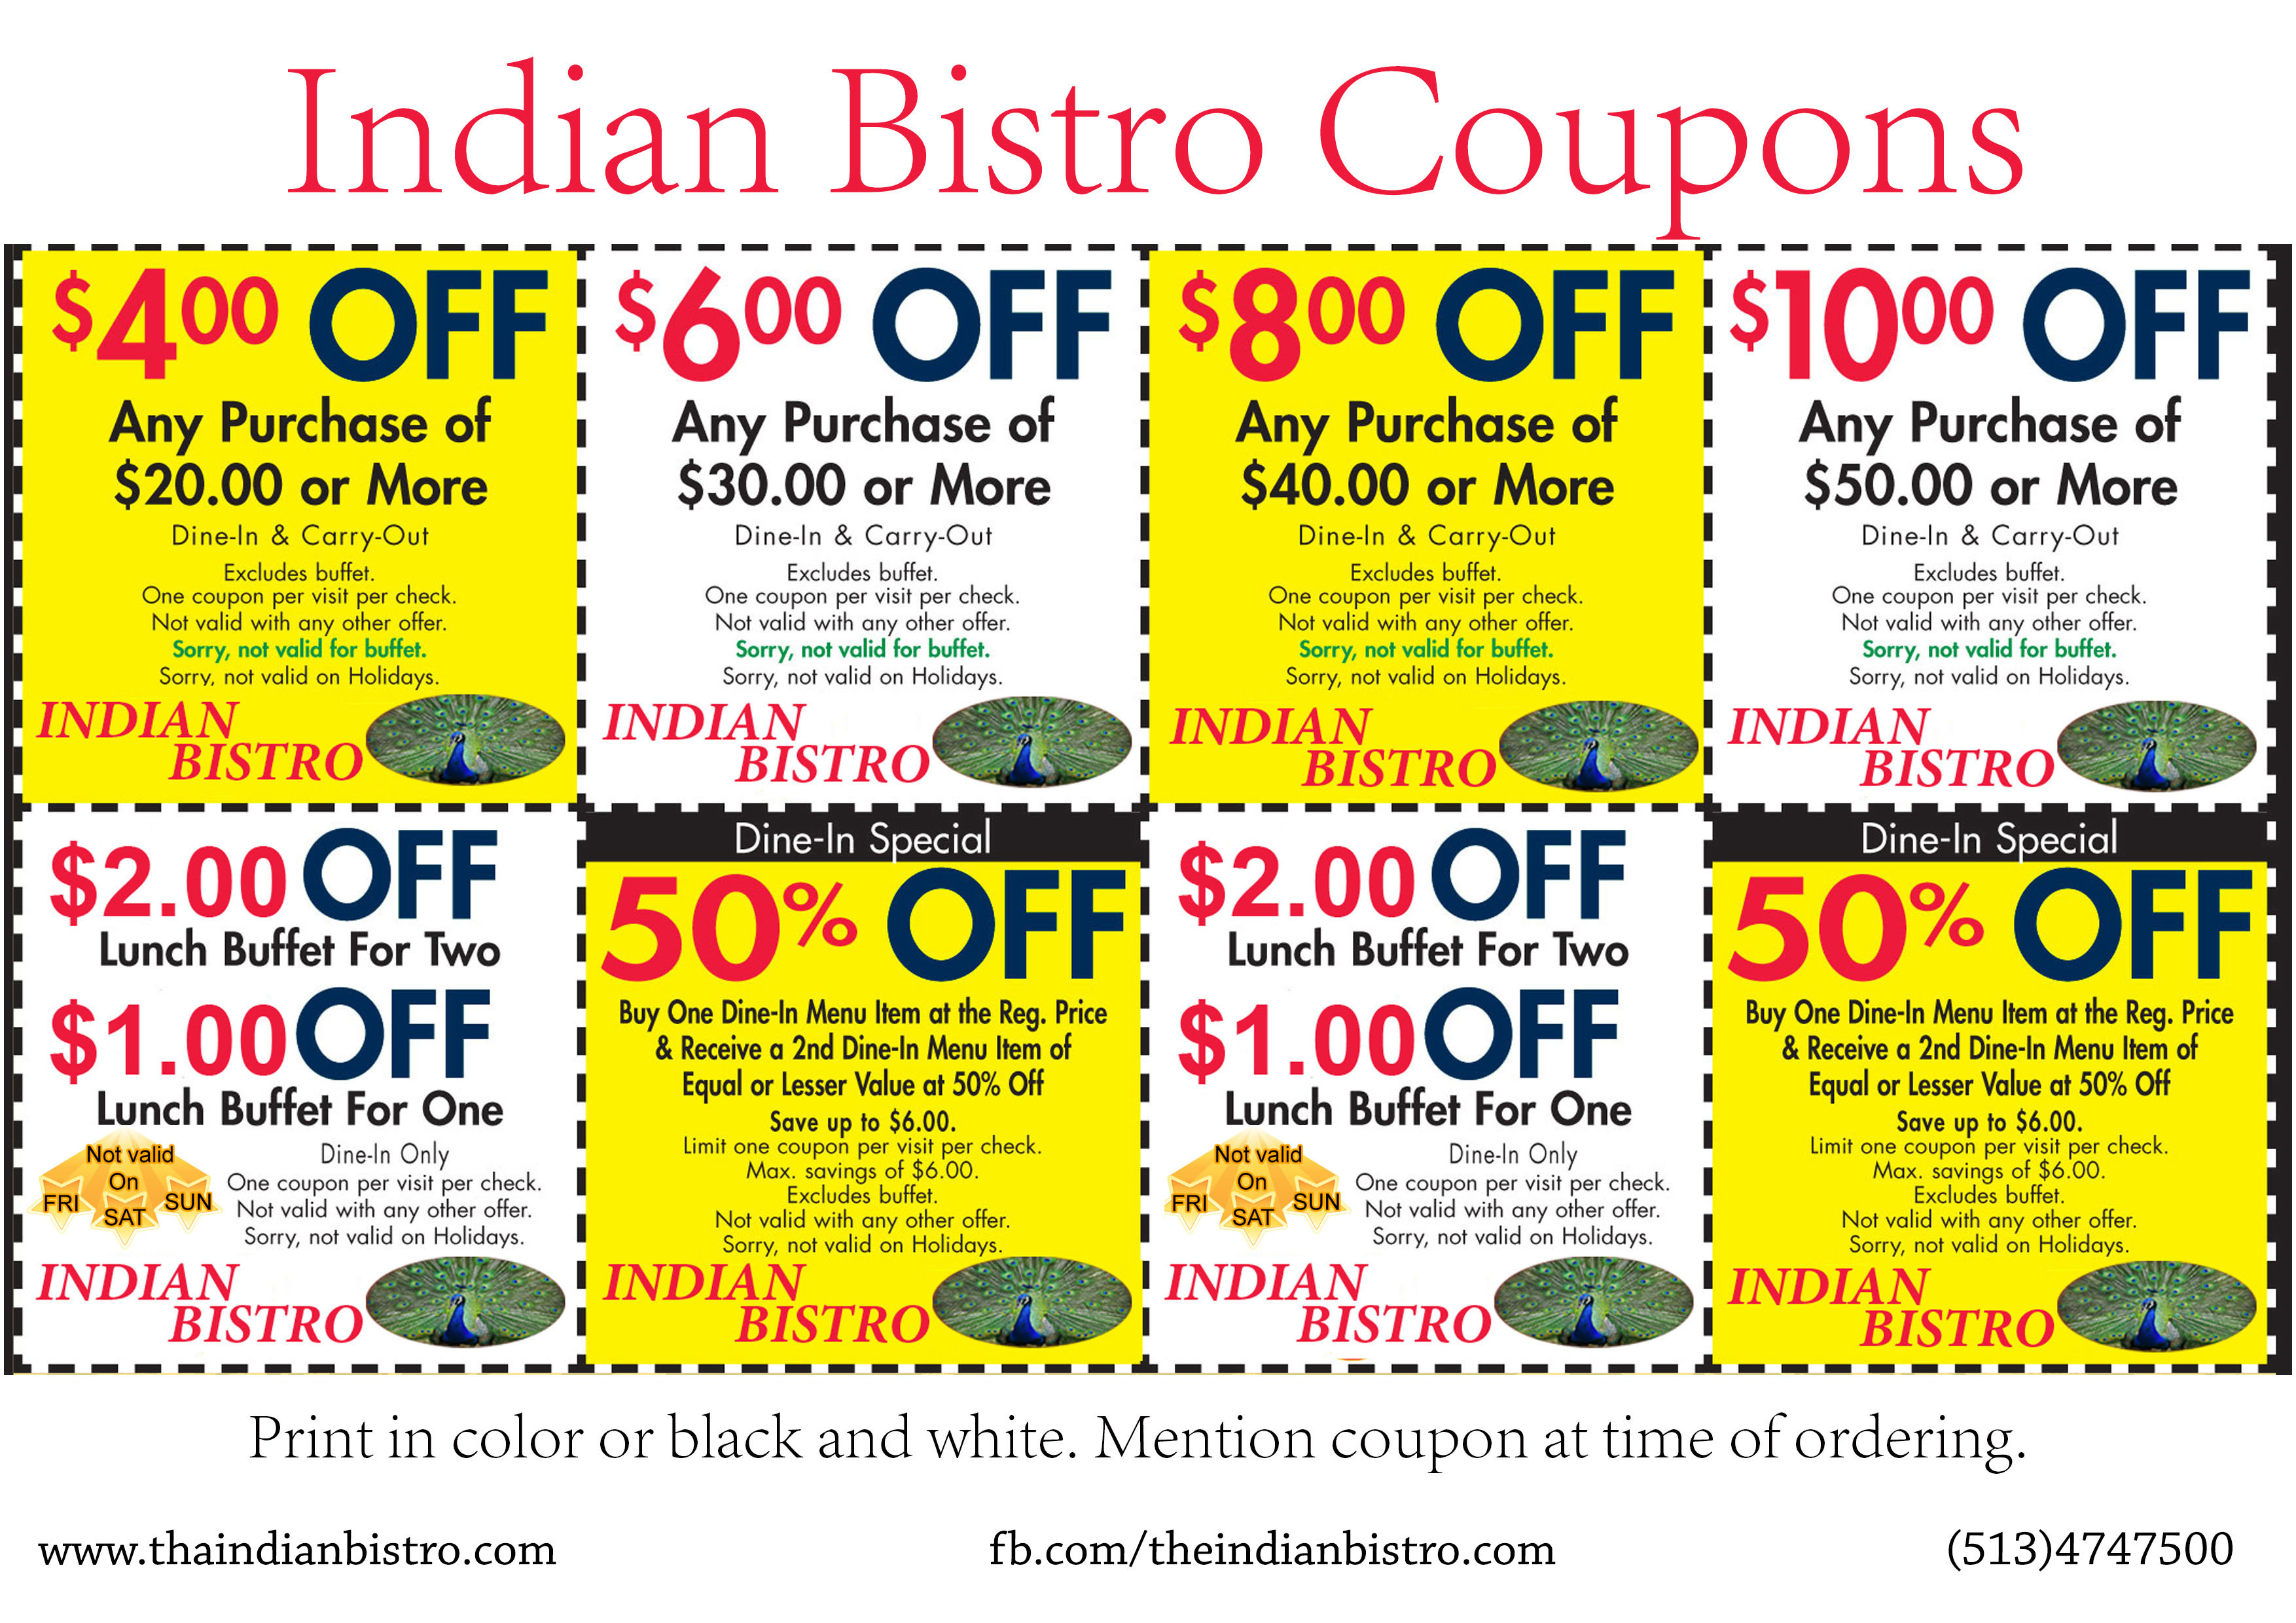 Inspirational Old Country Buffet Printable Coupons | Chart And - Old Country Buffet Printable Coupons Buy One Get One Free